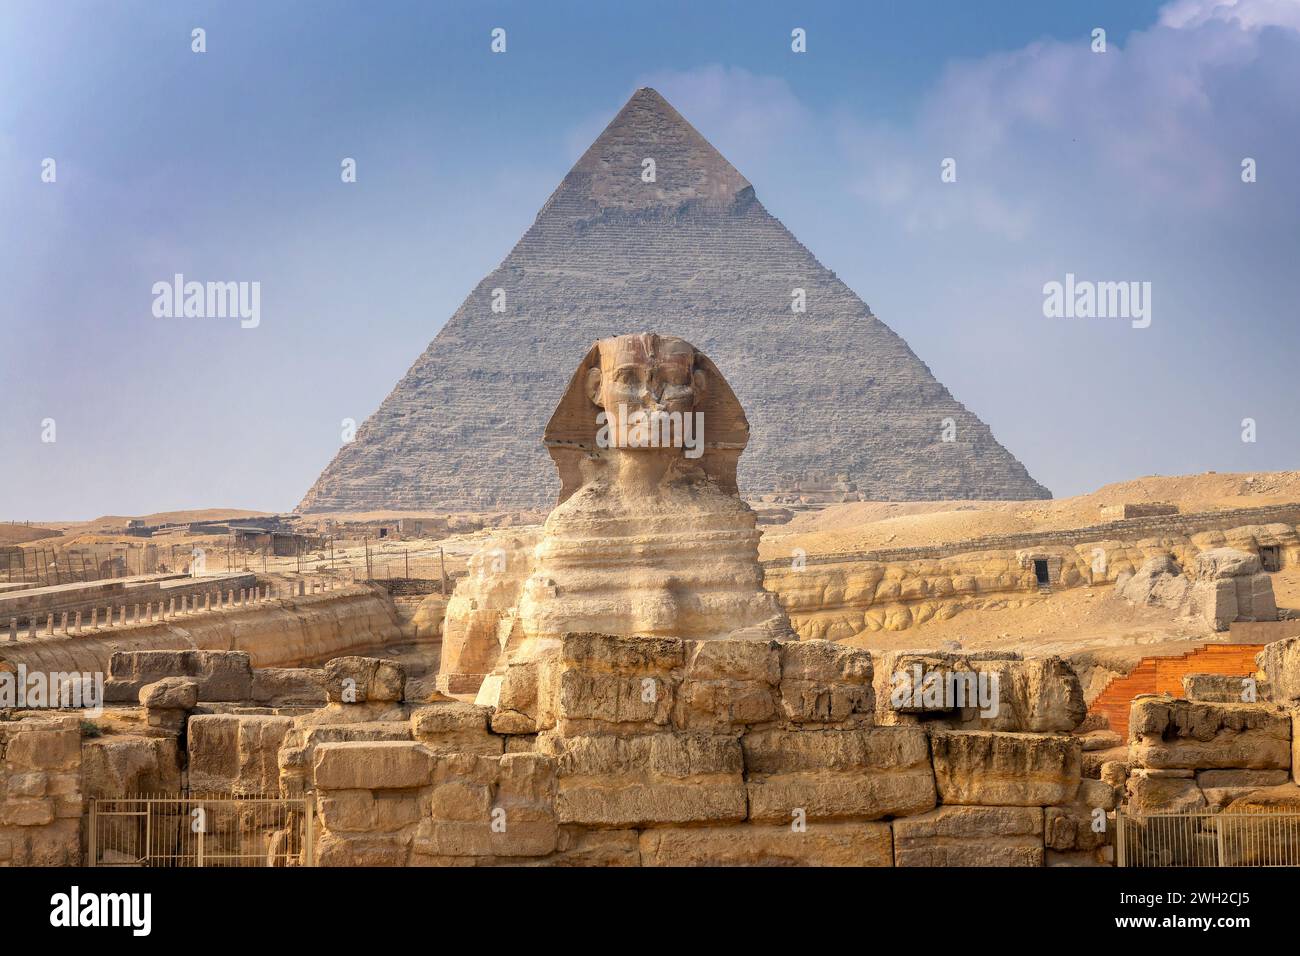 Front view of The Great Sphinx of Giza with the pyramid of Khafre, Cairo, Egypt Stock Photo